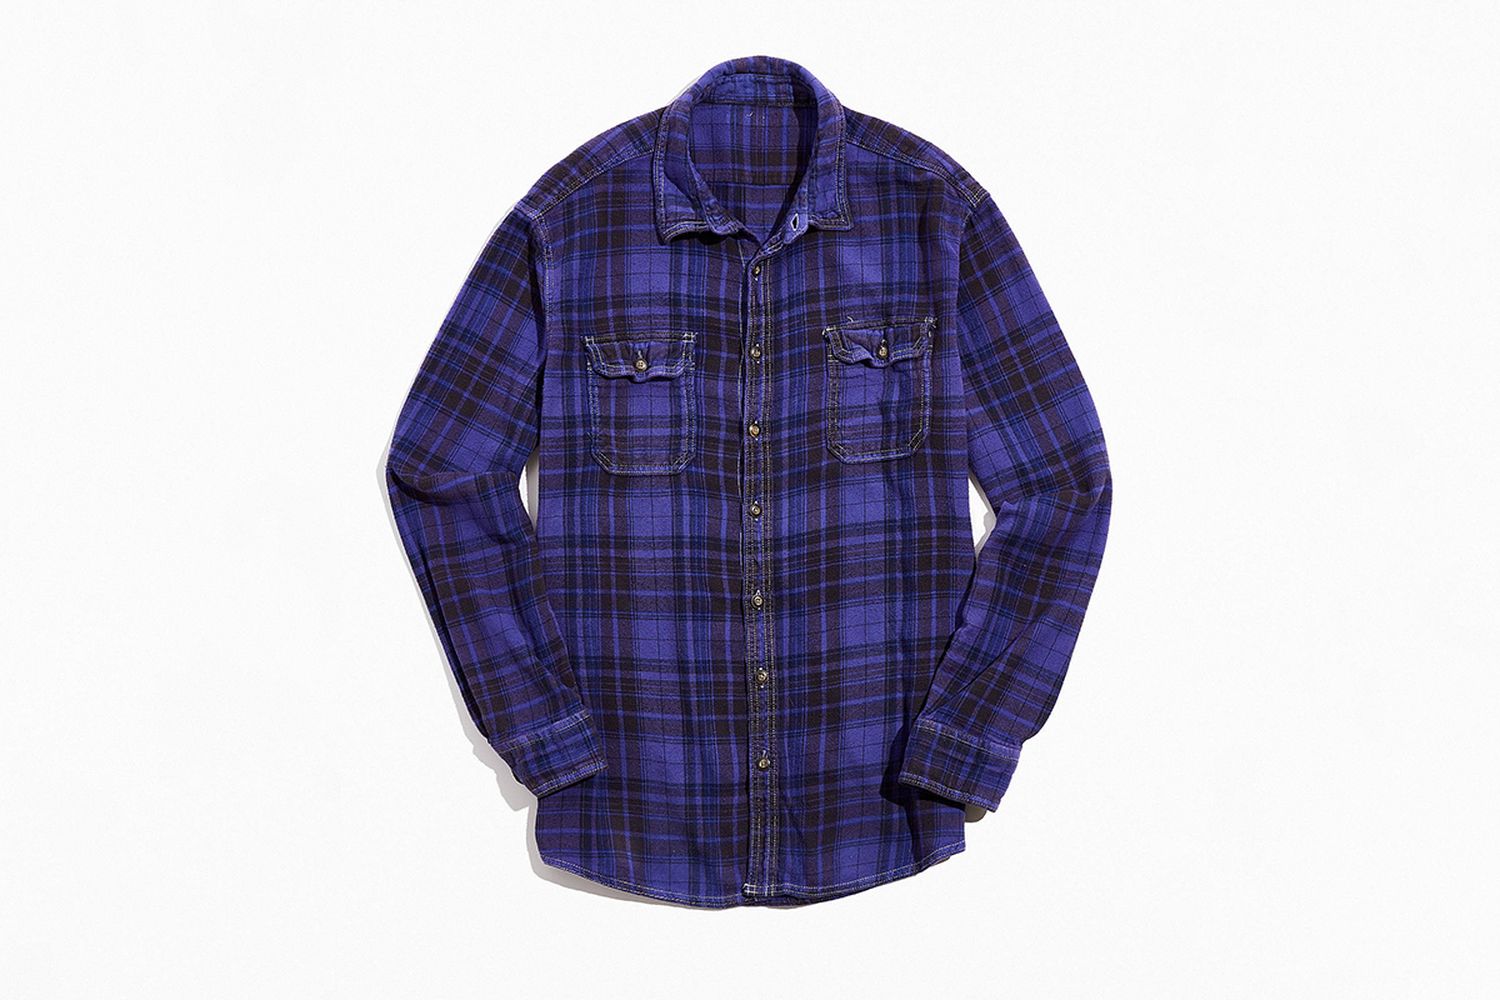 Overdyed Vintage Flannel Shirt